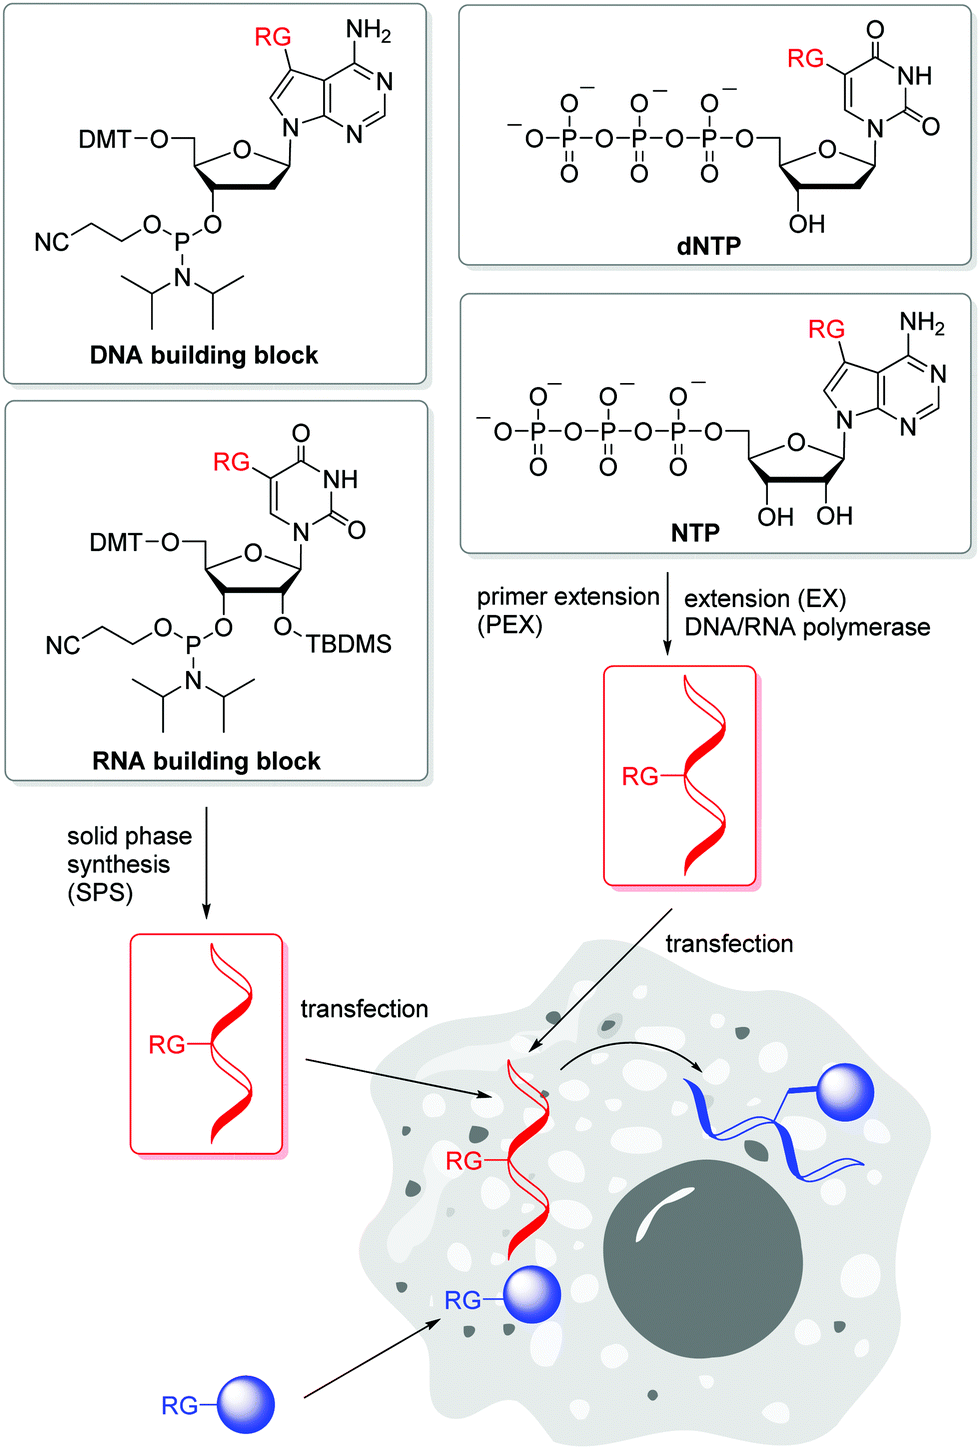 Labelling Of Dna And Rna In The Cellular Environment By Means Of Bioorthogonal Cycloaddition Chemistry Rsc Chemical Biology Rsc Publishing Doi 10 1039 D0cbg